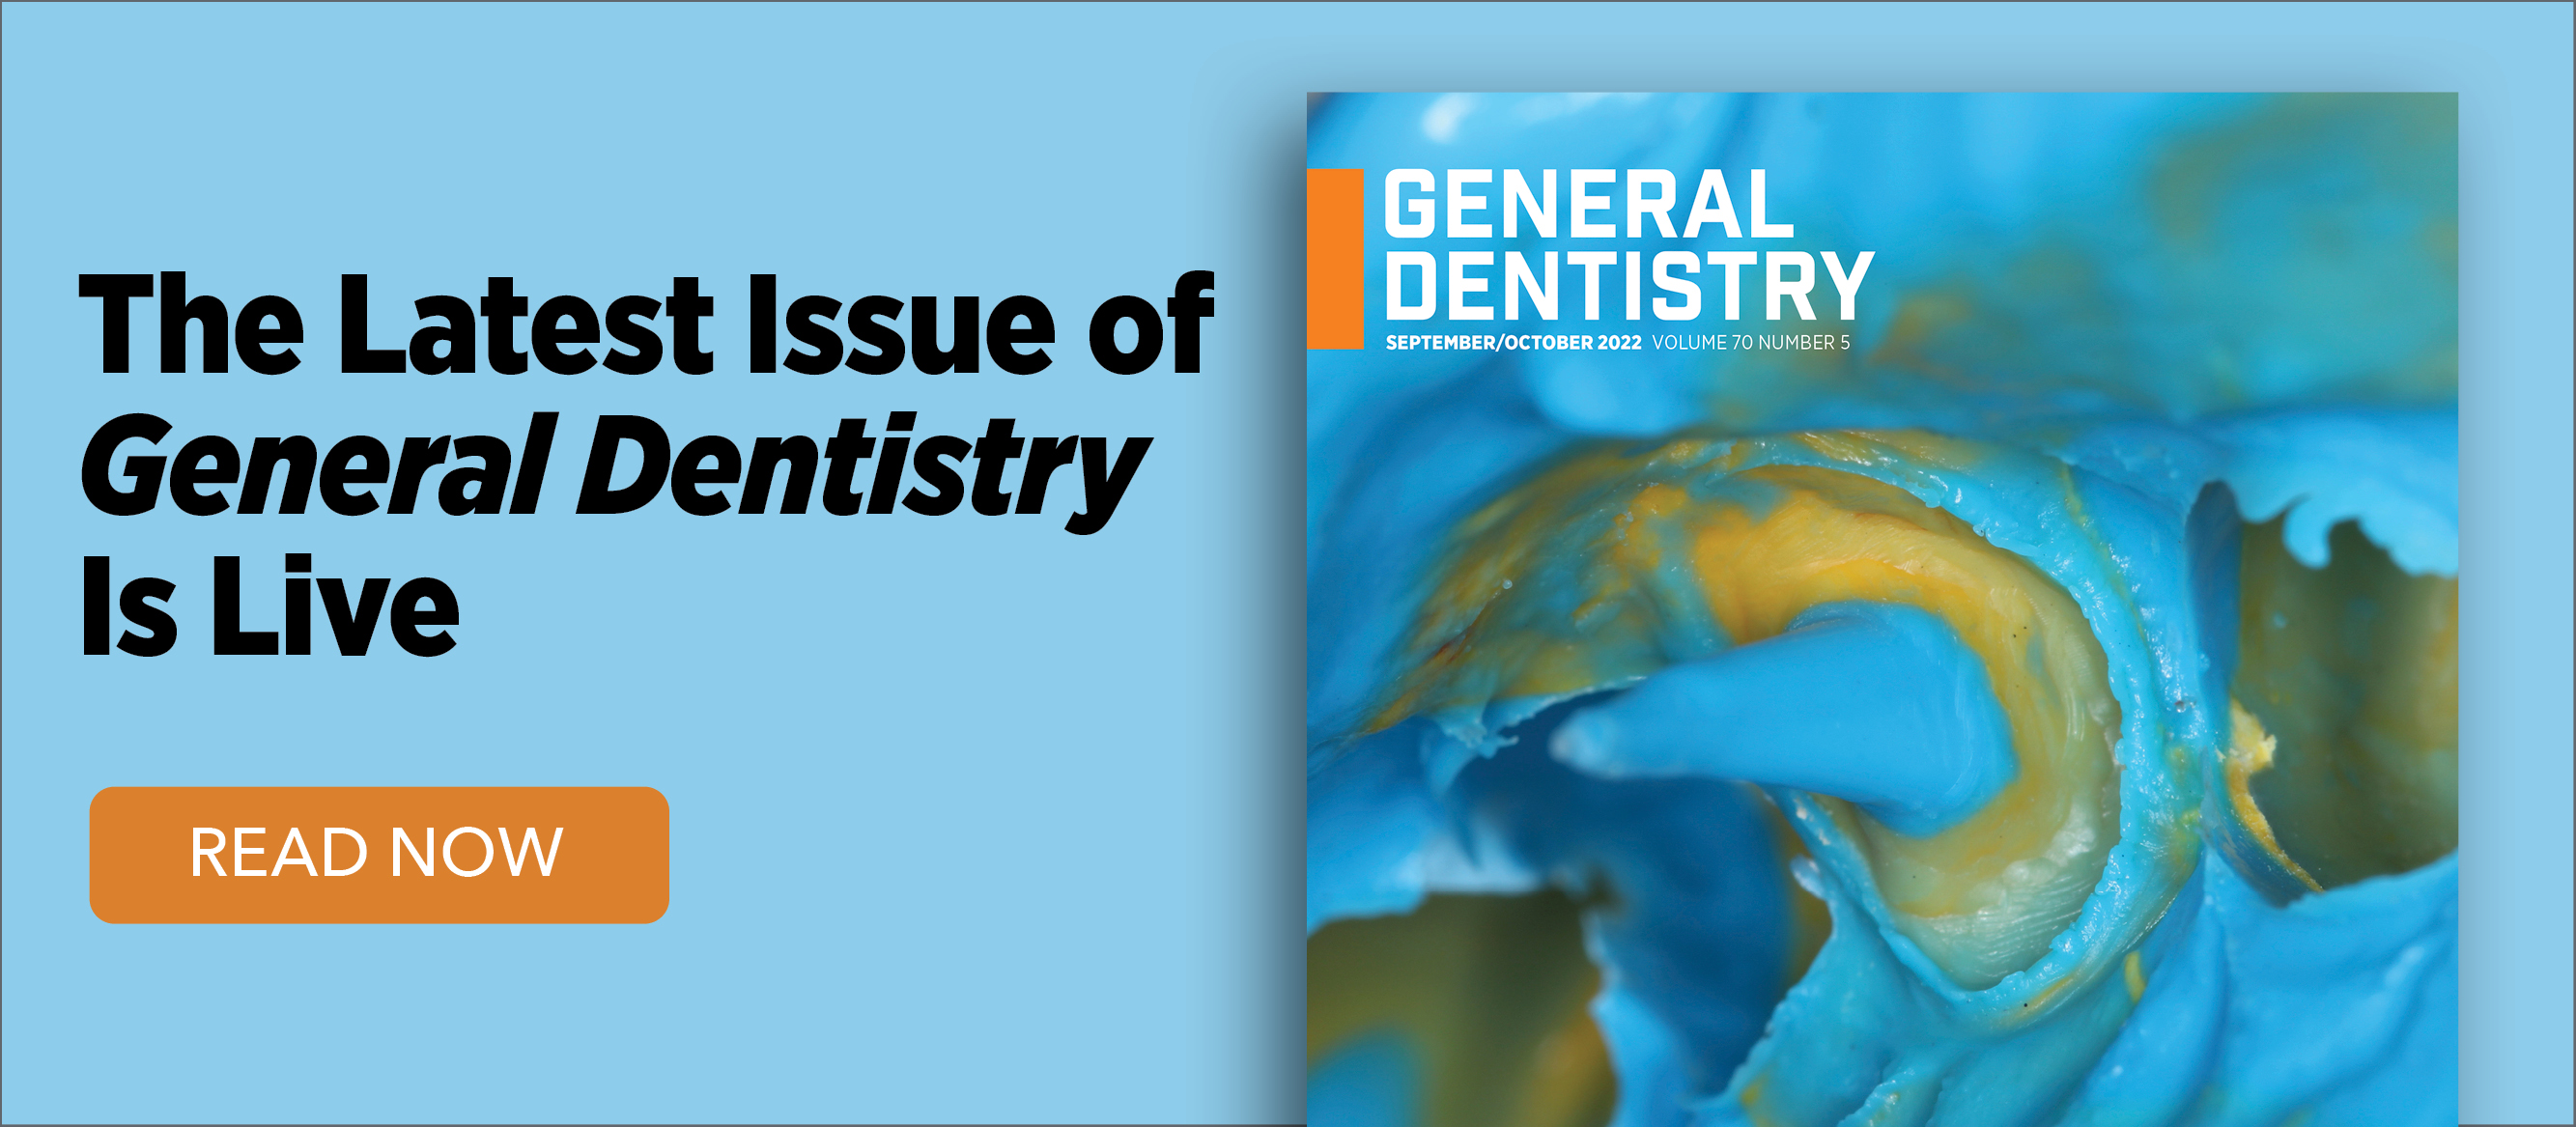 The Latest Issue of General Dentistry Is Live